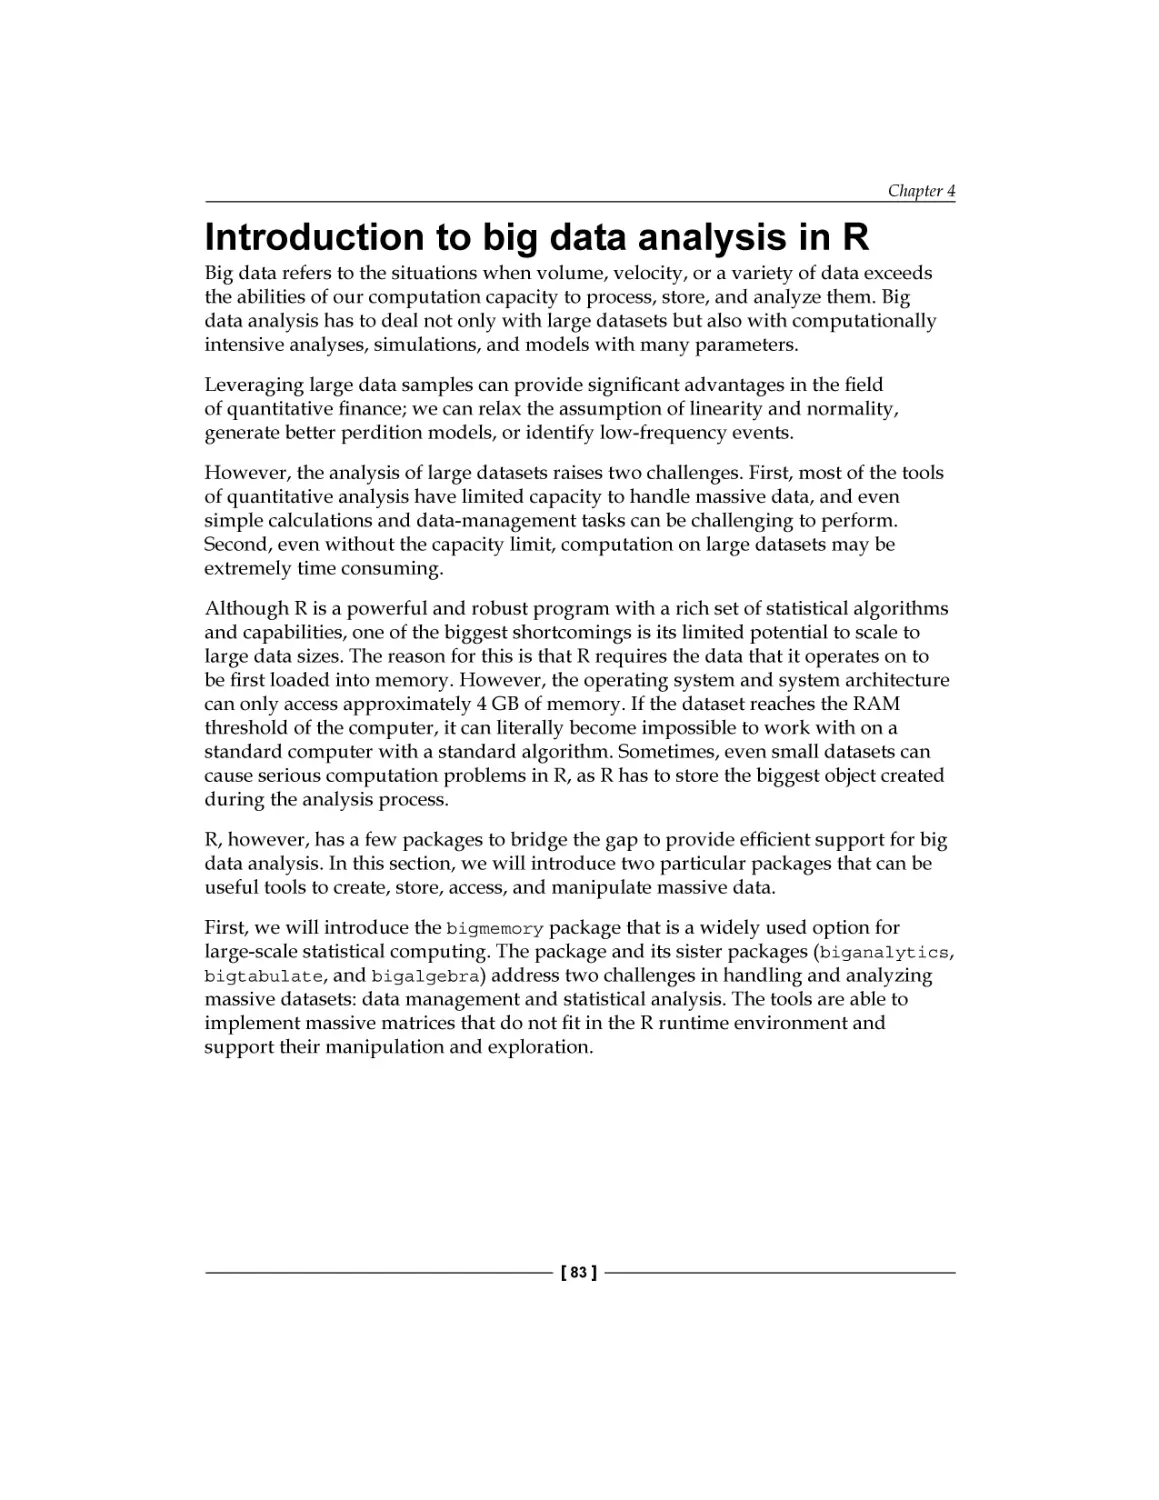 Introduction to big data analysis in R